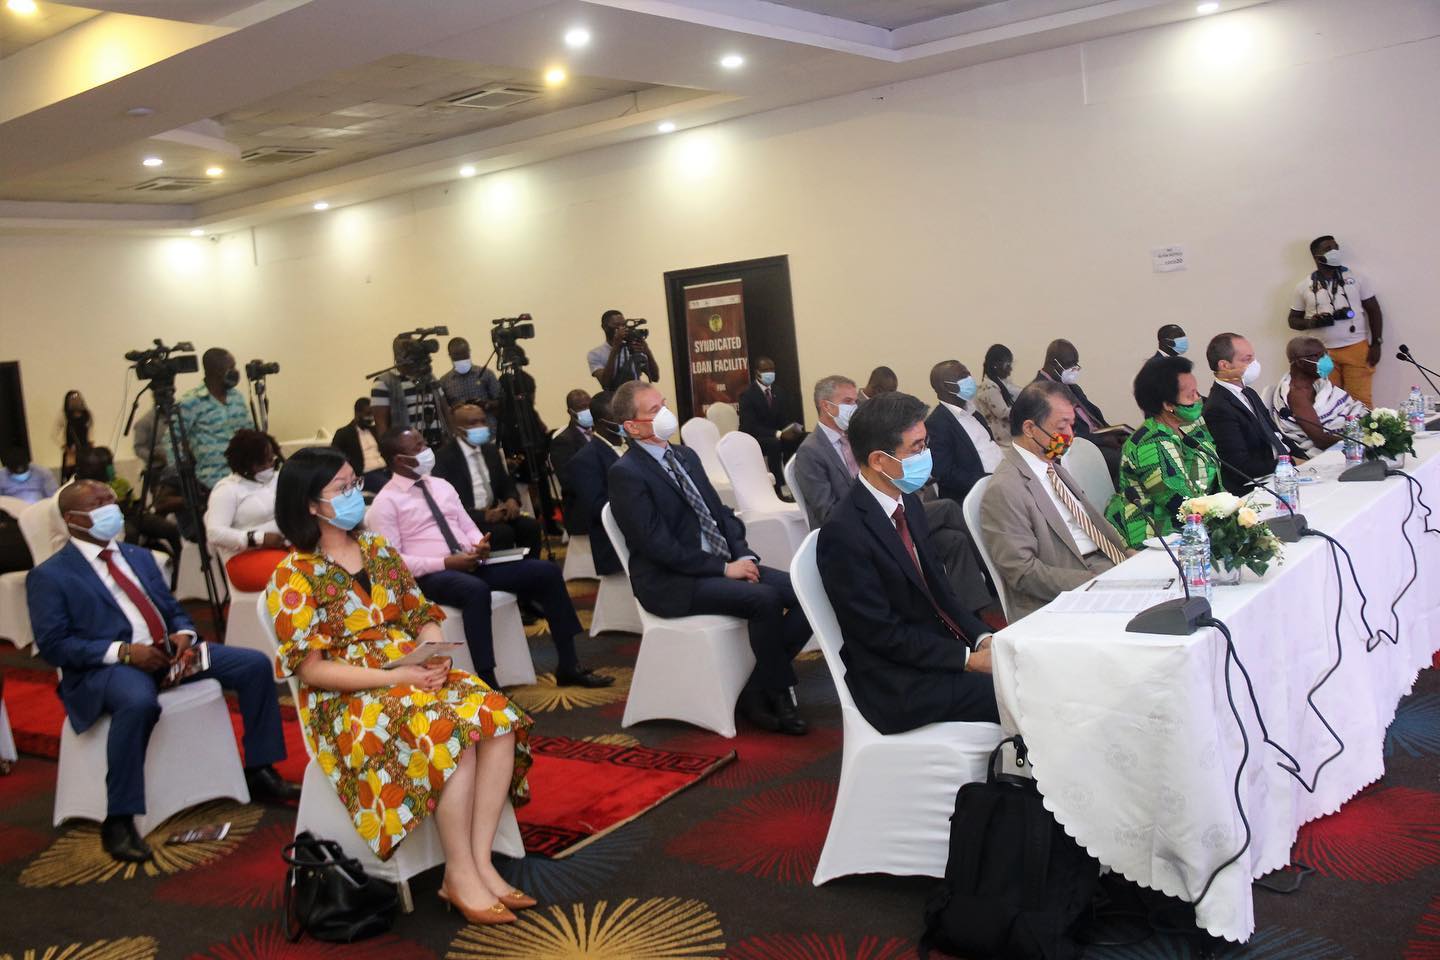 SCENES FROM LAUNCH CEREMONY FOR US$600 MILLION SYNDICATED LOAN FACILITY